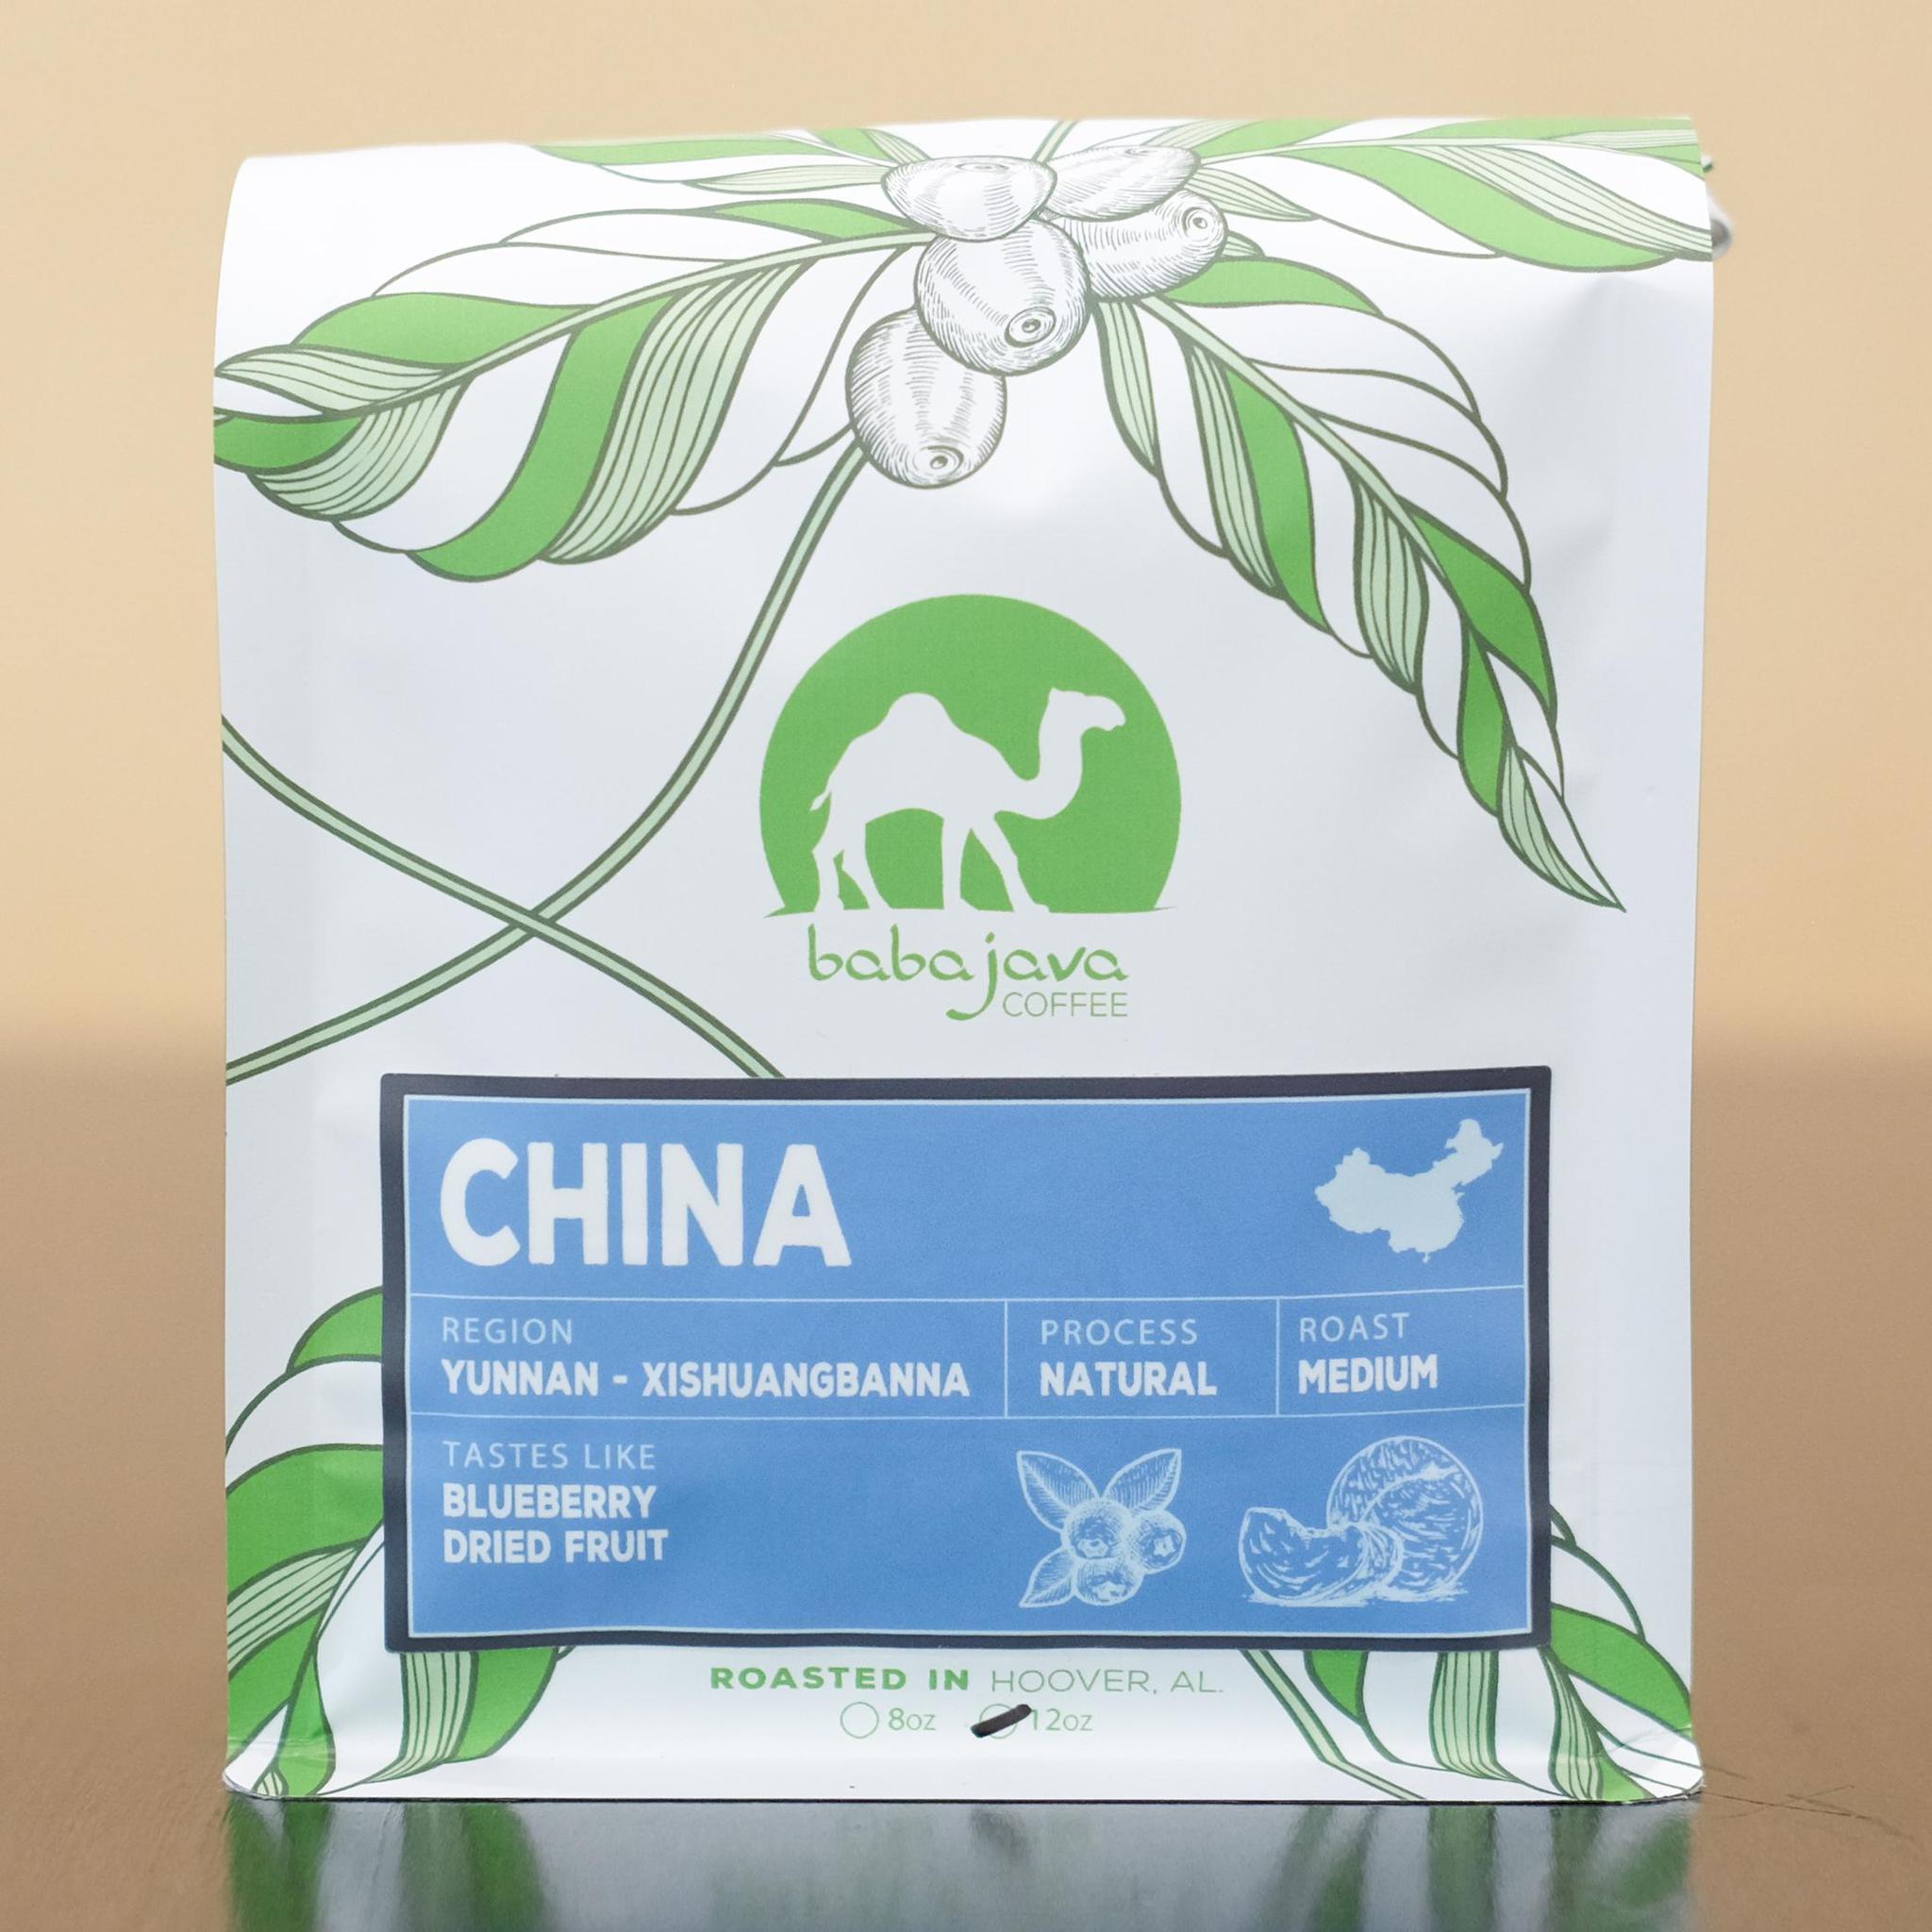 A bag of coffee with a light blue label that reads China. The bag has a drawing of a coffee plant and the Baba Java Coffee logo.